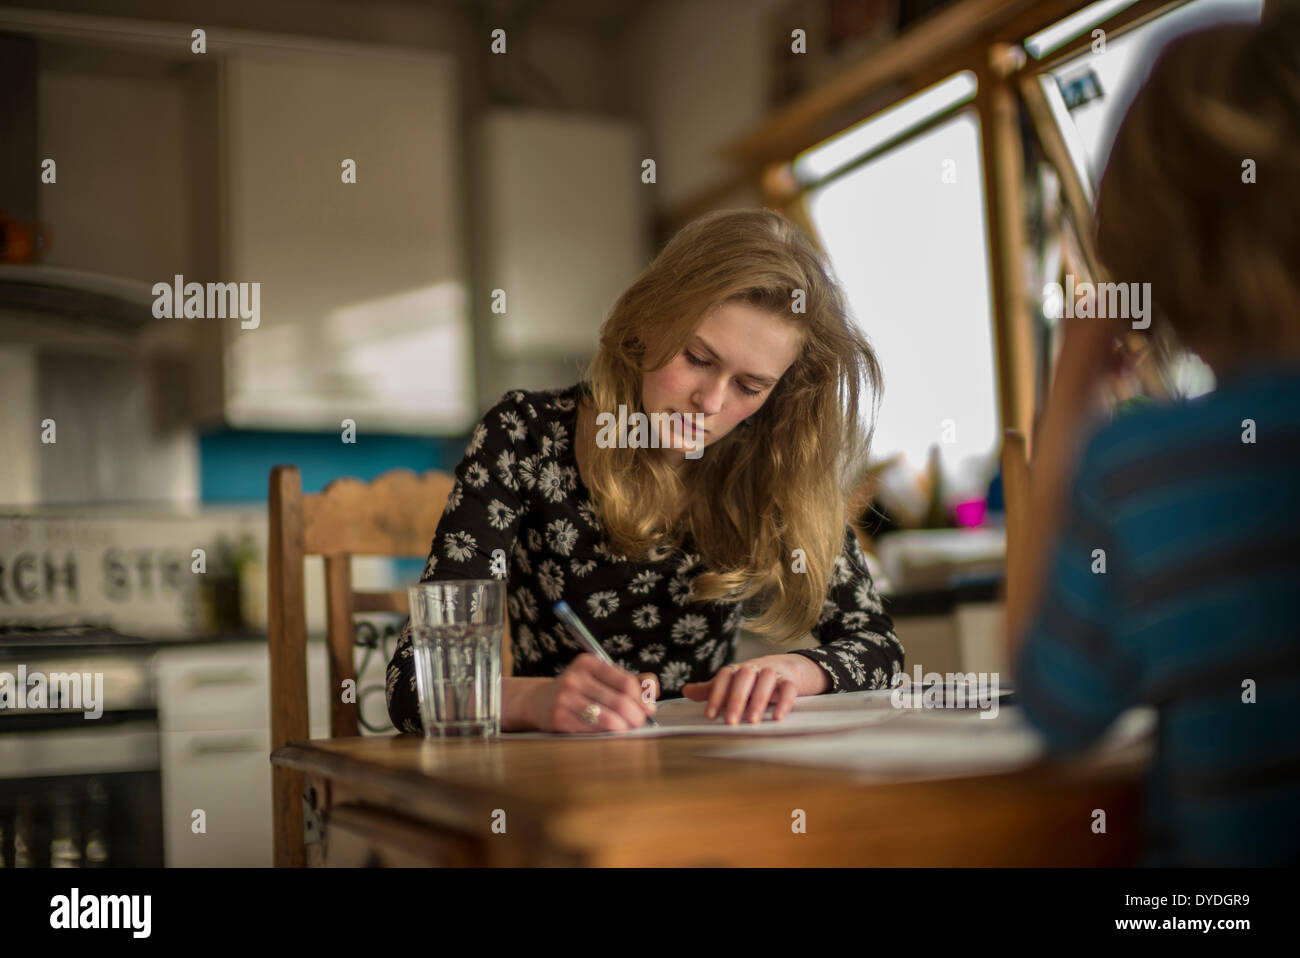 A 16 year old girl doing math homework on the kitchen table. Stock Photo